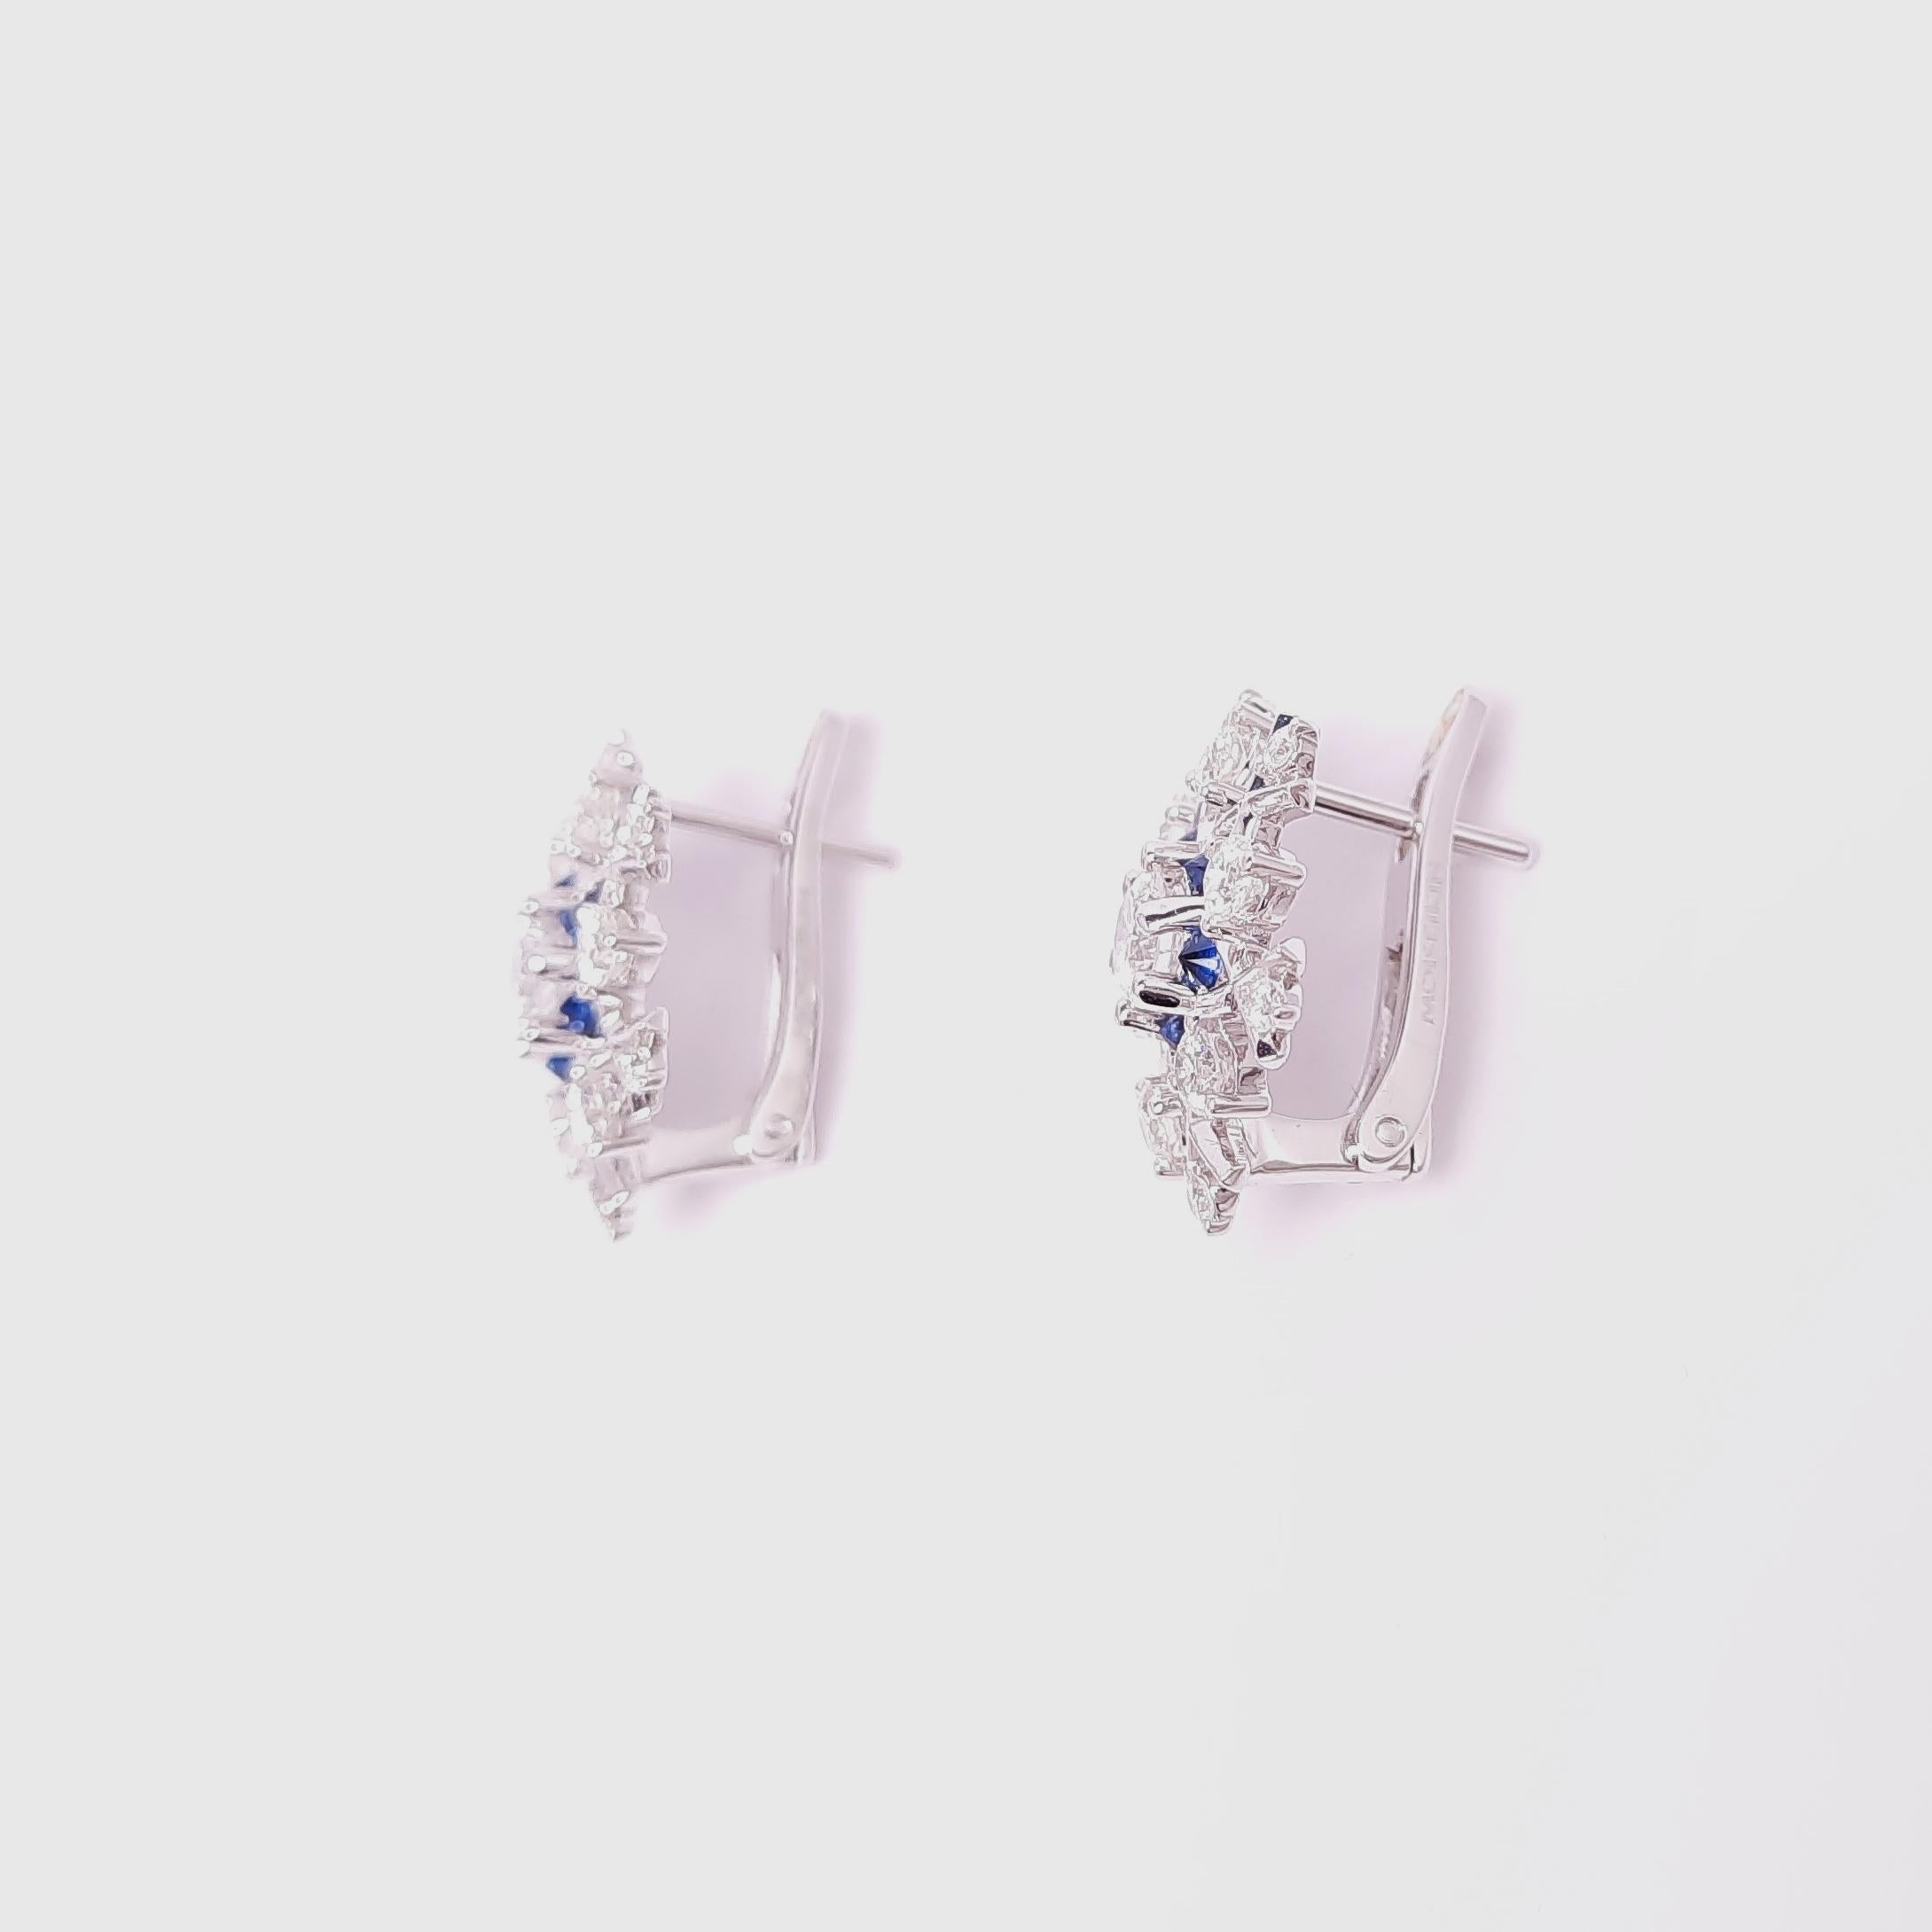 The new year has come, yet it's still the time for powdery snow. MOISEIKIN's diamond earrings from the Snowflake collection remind us of the fairytale of Snow Queen. Radiant blue sapphires are reversely mounted between flawless diamonds, embodying